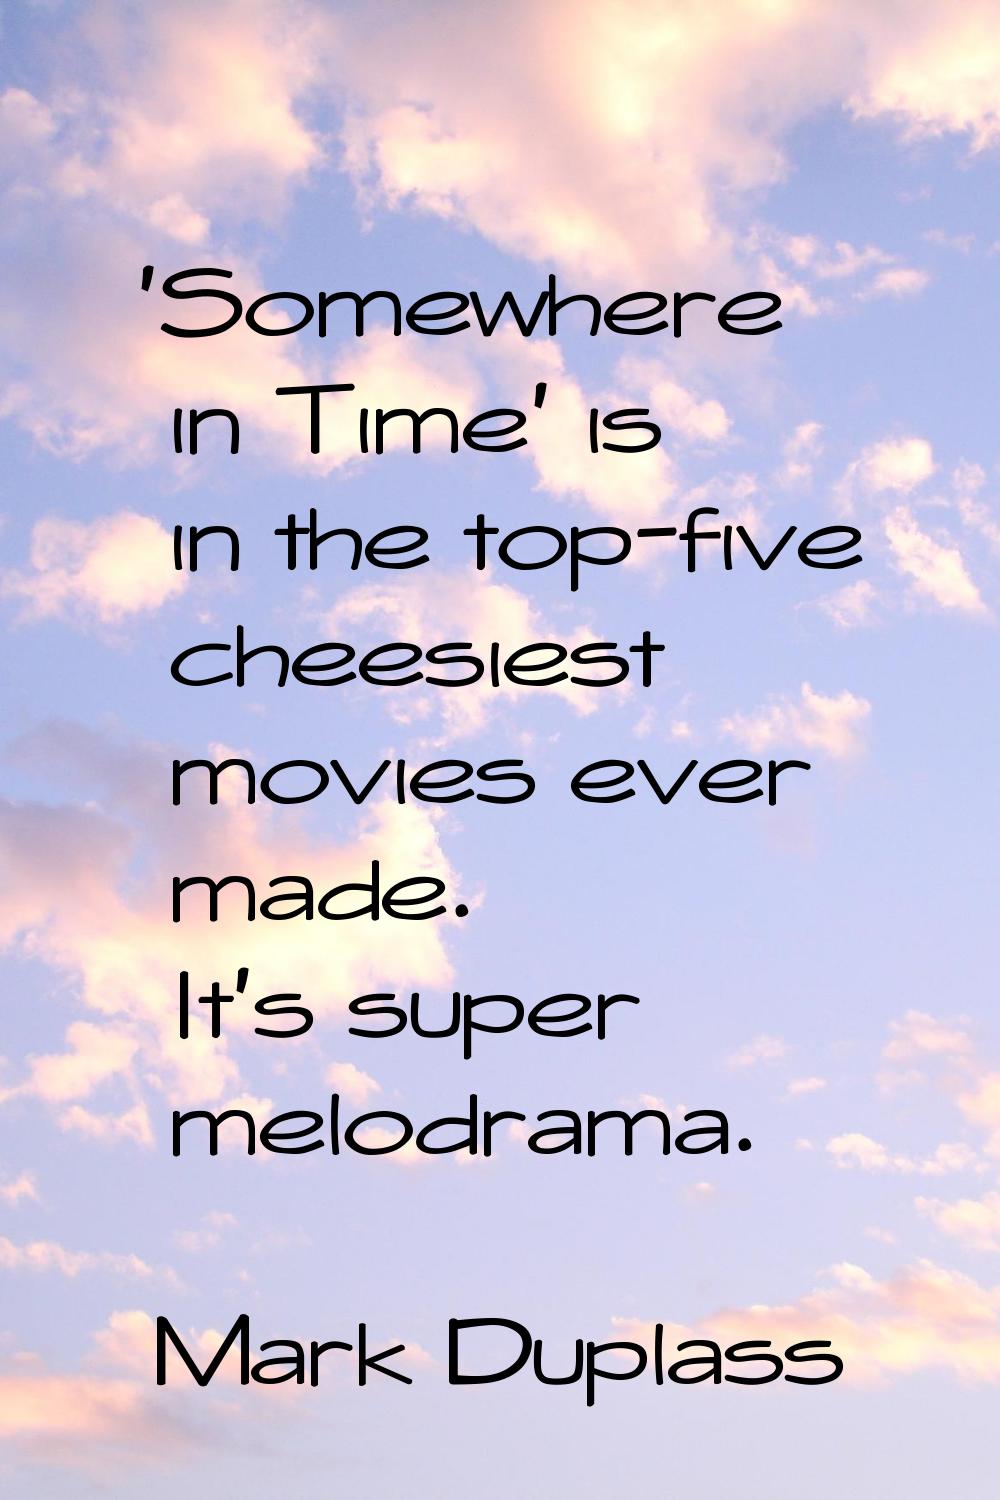 'Somewhere in Time' is in the top-five cheesiest movies ever made. It's super melodrama.